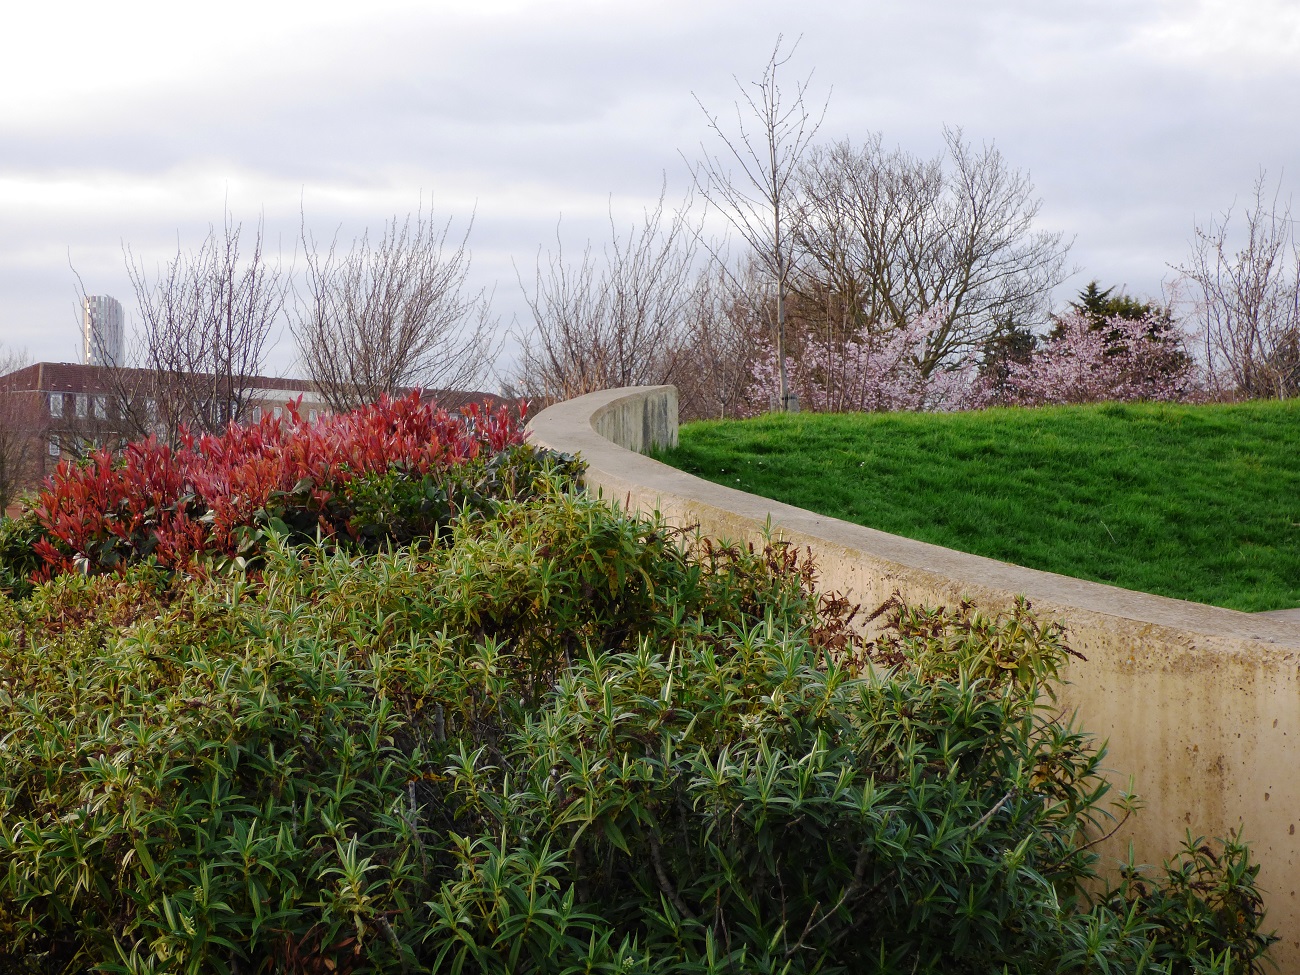 20170313_Newham_Memorial-Recreation-Ground_Shrubs-on-the-hill